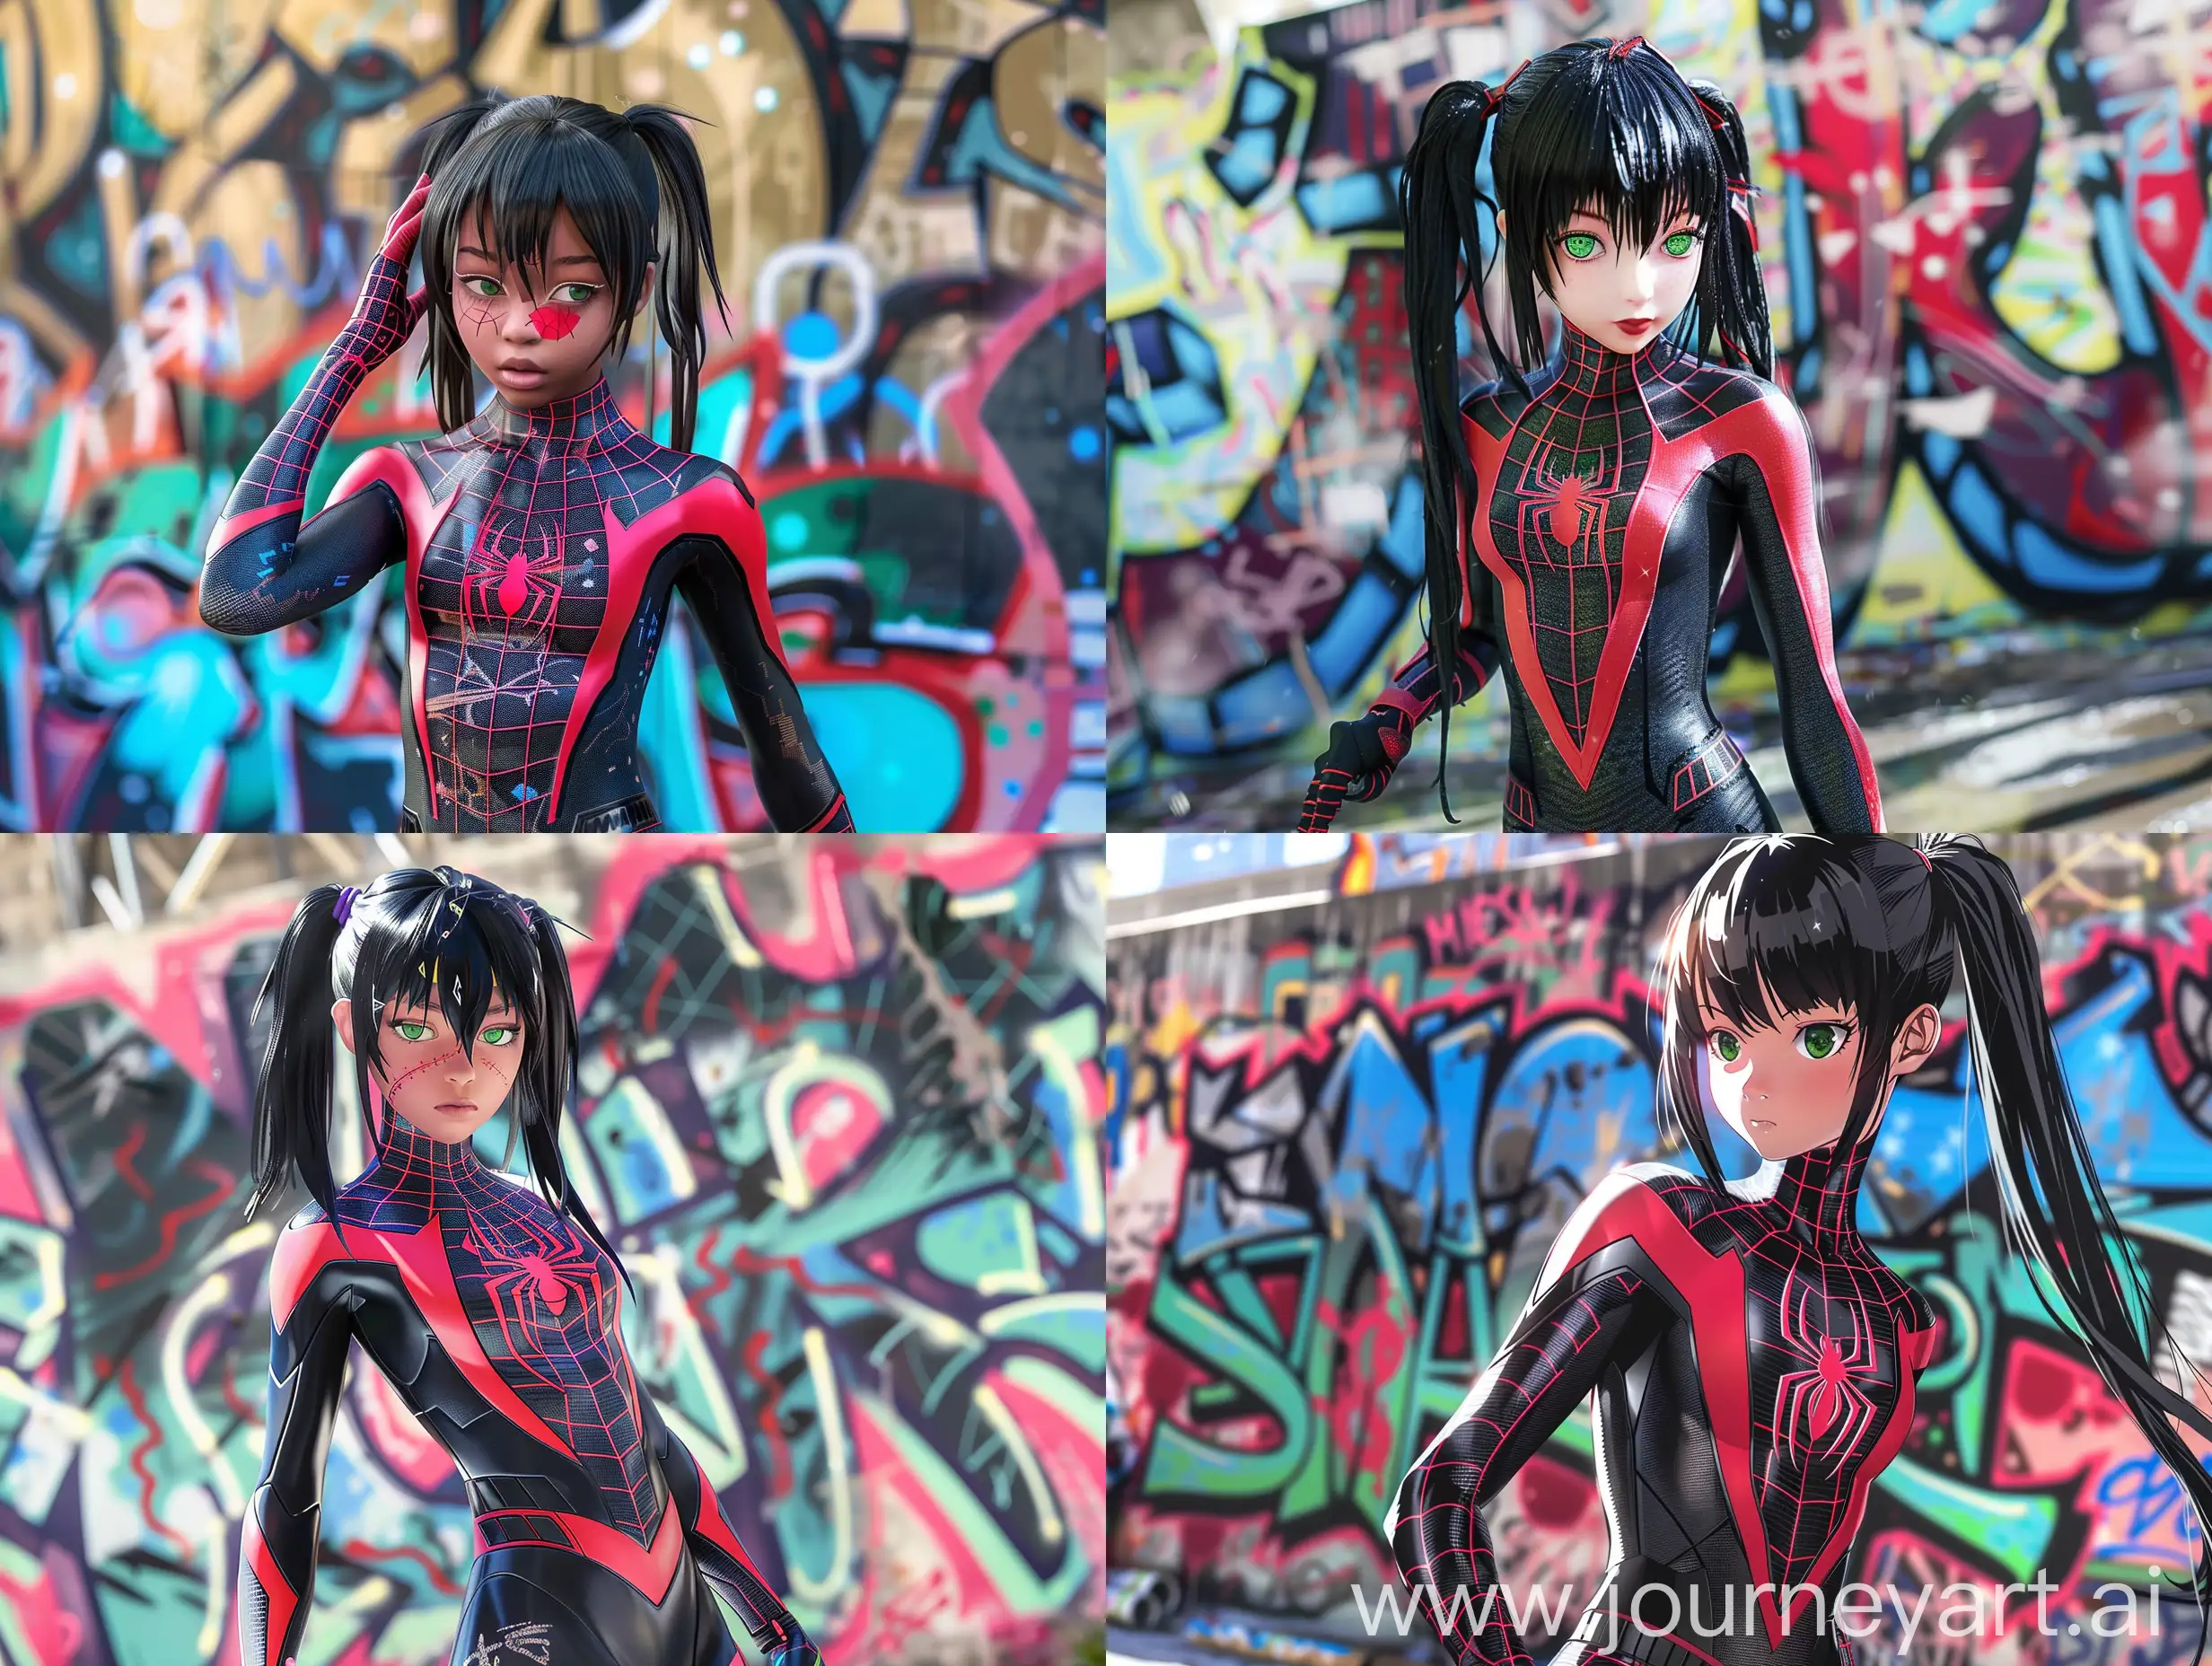 Stunning-Anime-Girl-in-Miles-Morales-SpiderMan-Suit-Posing-by-Graffiti-Wall